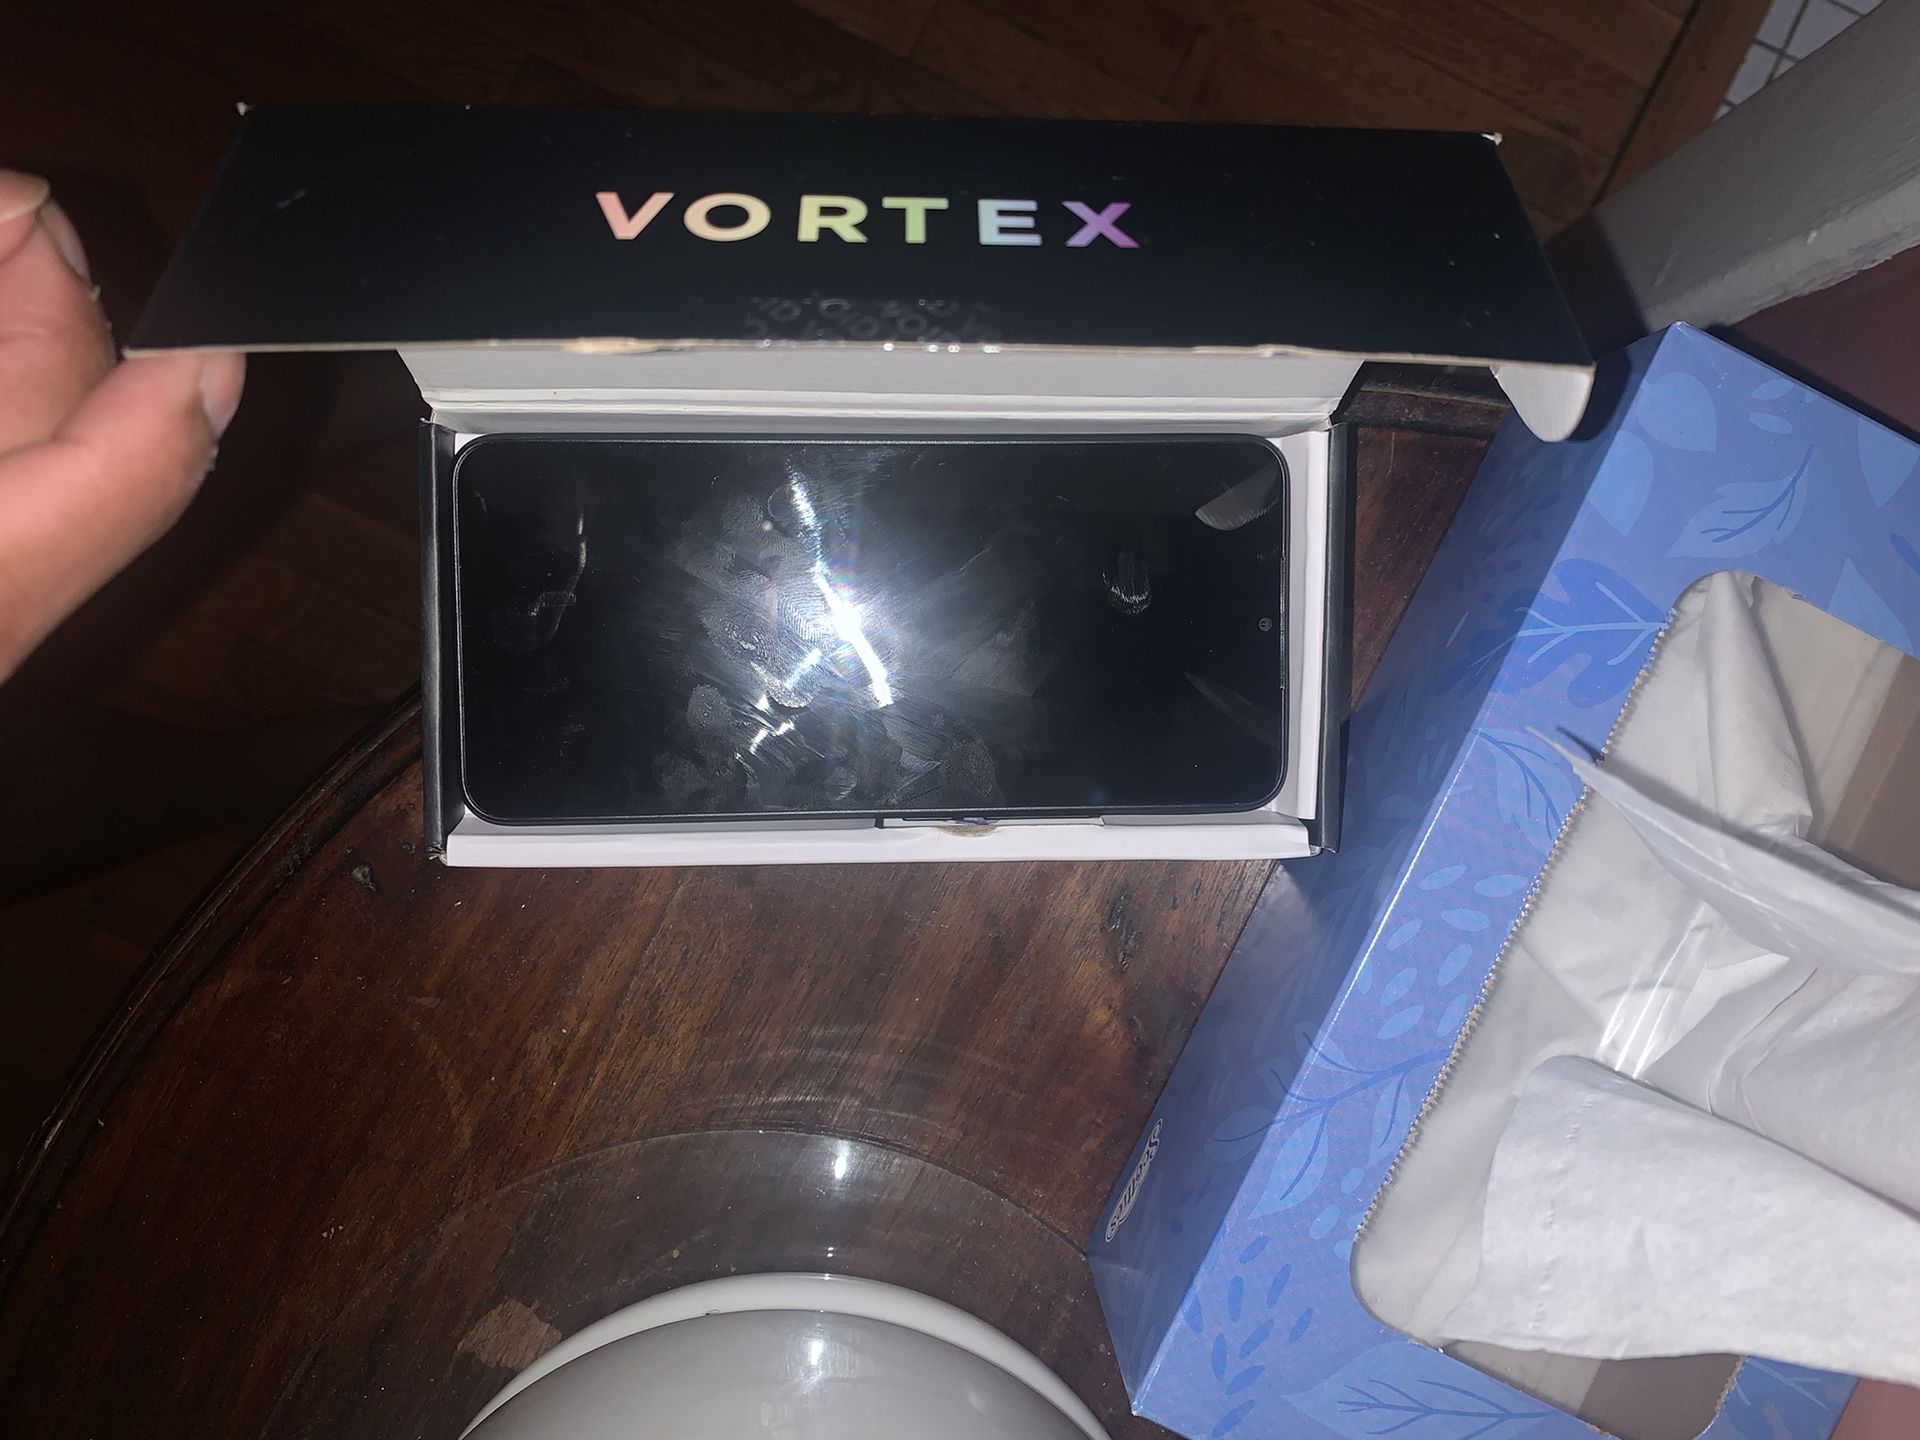 Vortex Cell Phone ultra65 WITH BURNOUT SIM CARD FREE SERVICE 5 YEARS New can’t beat it $280